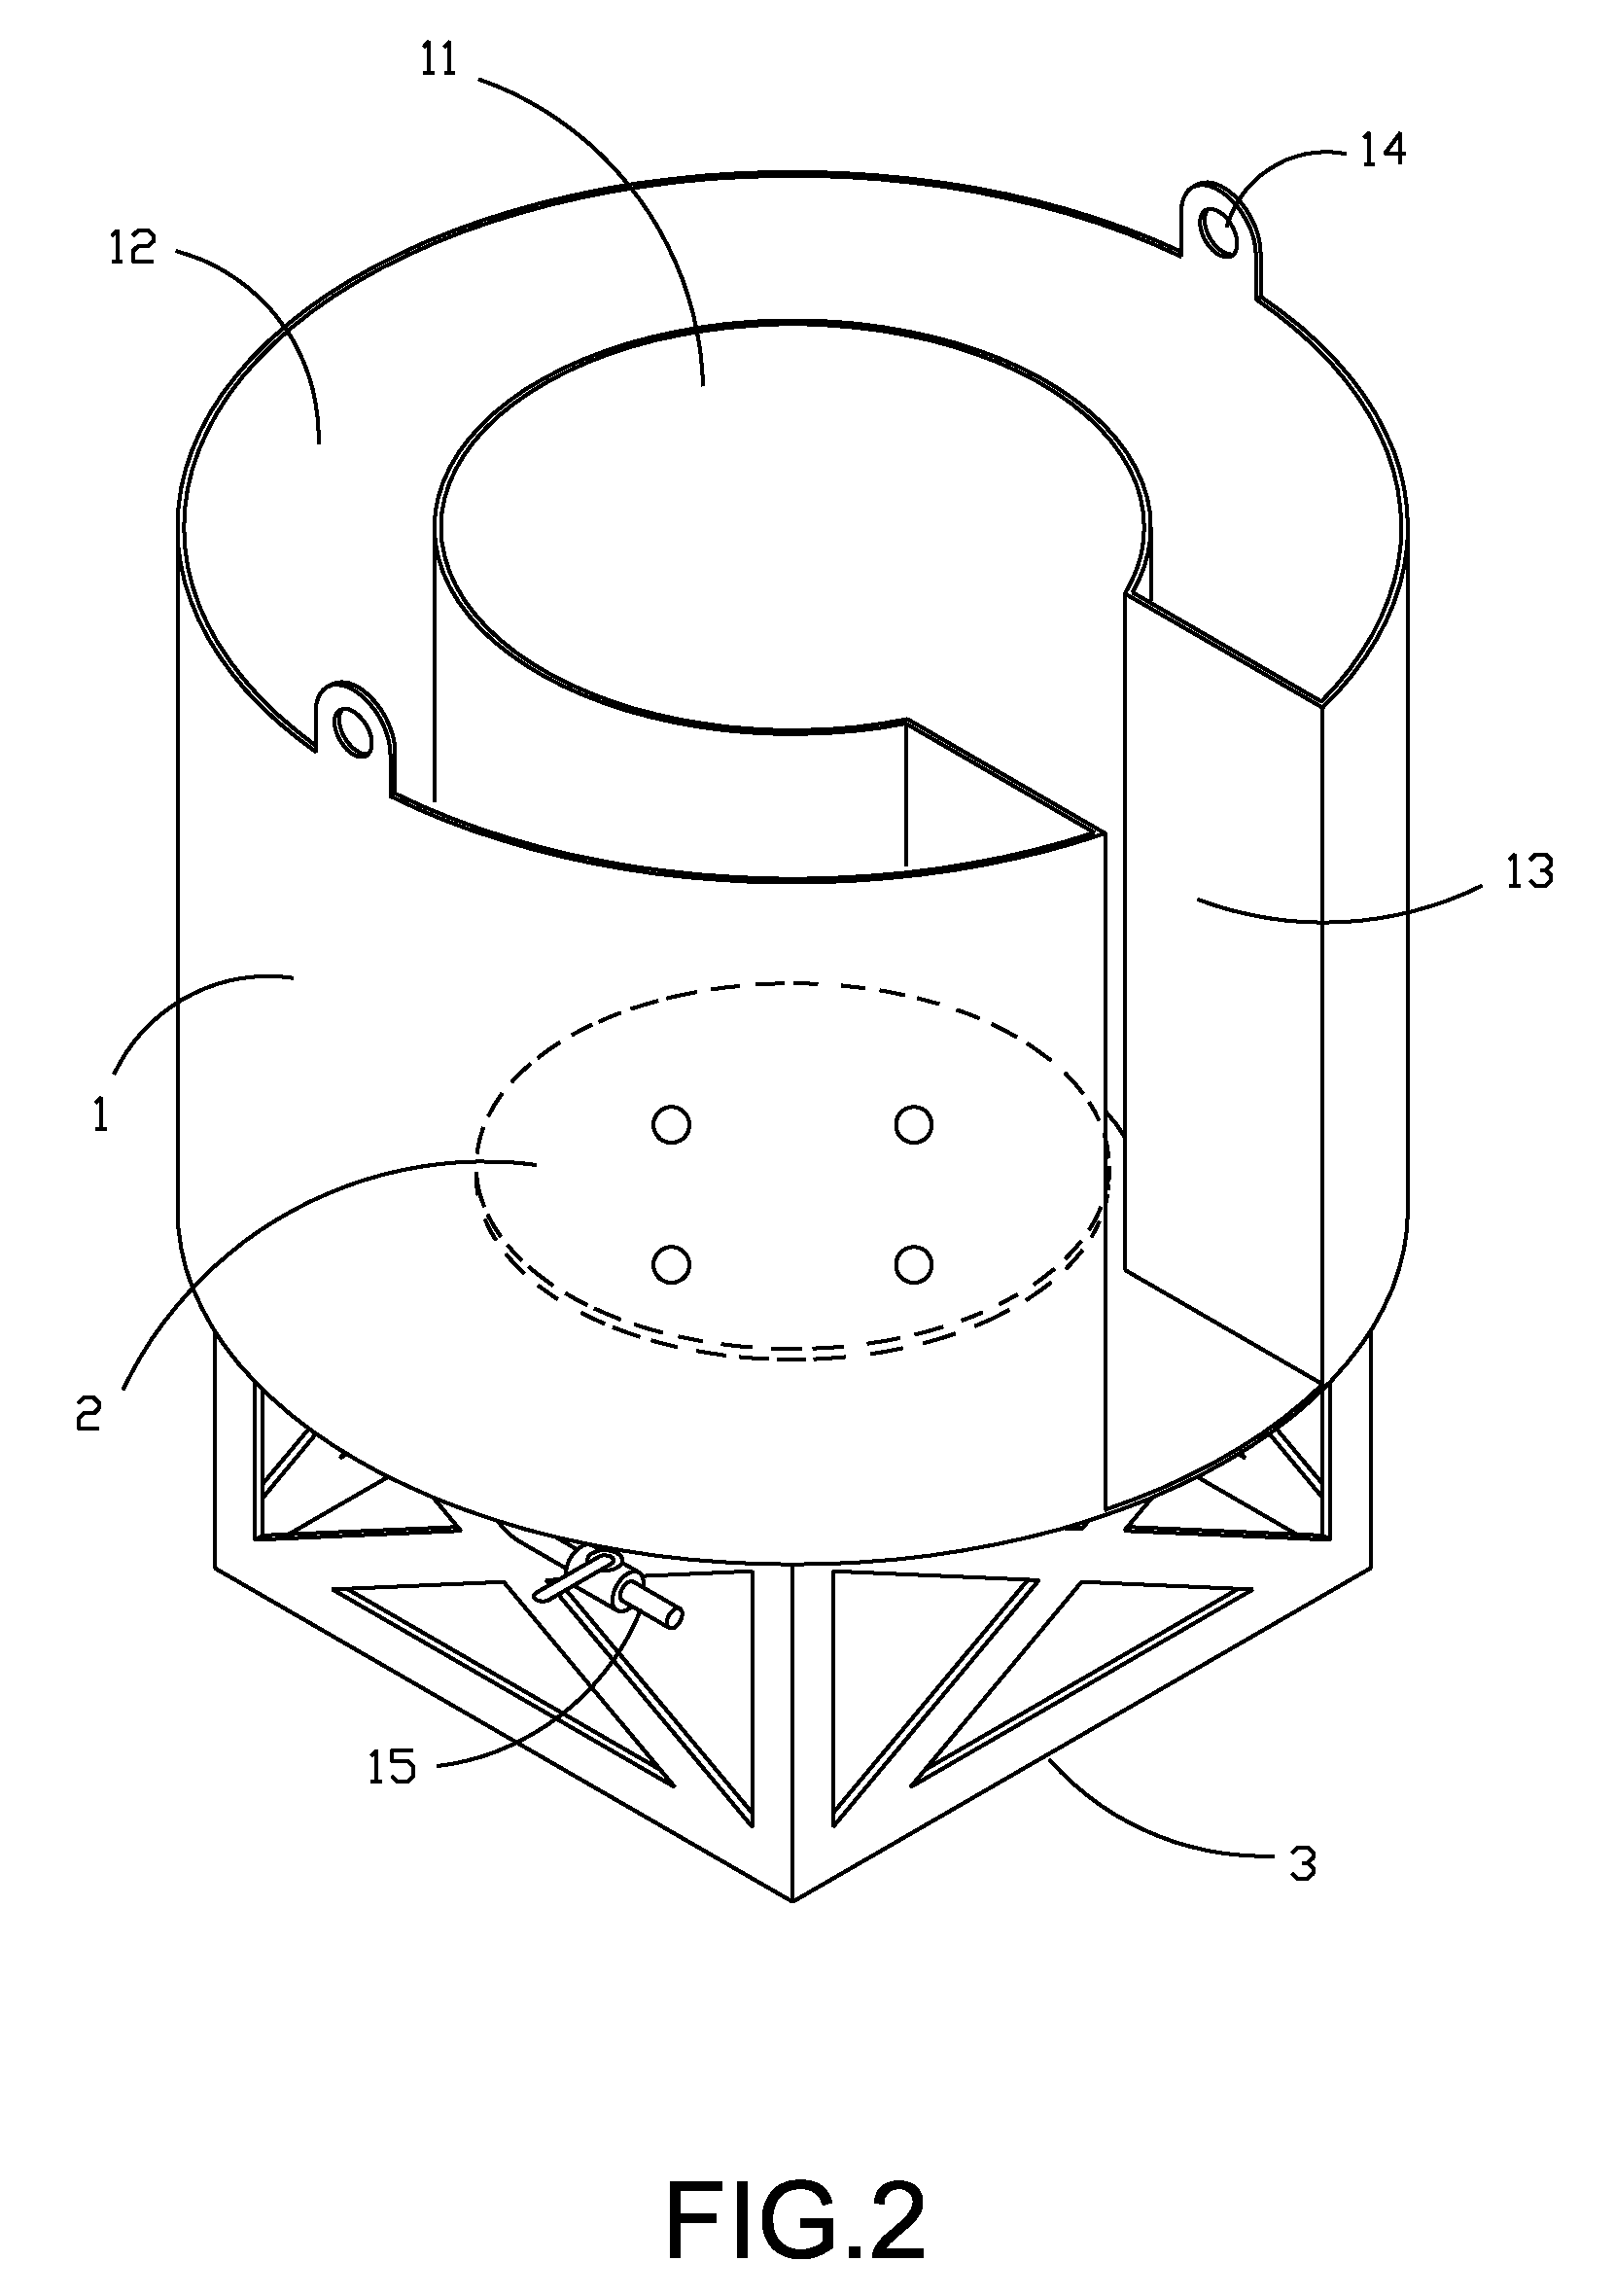 Apparatus for disposal of low-level surface radioactive pollutants